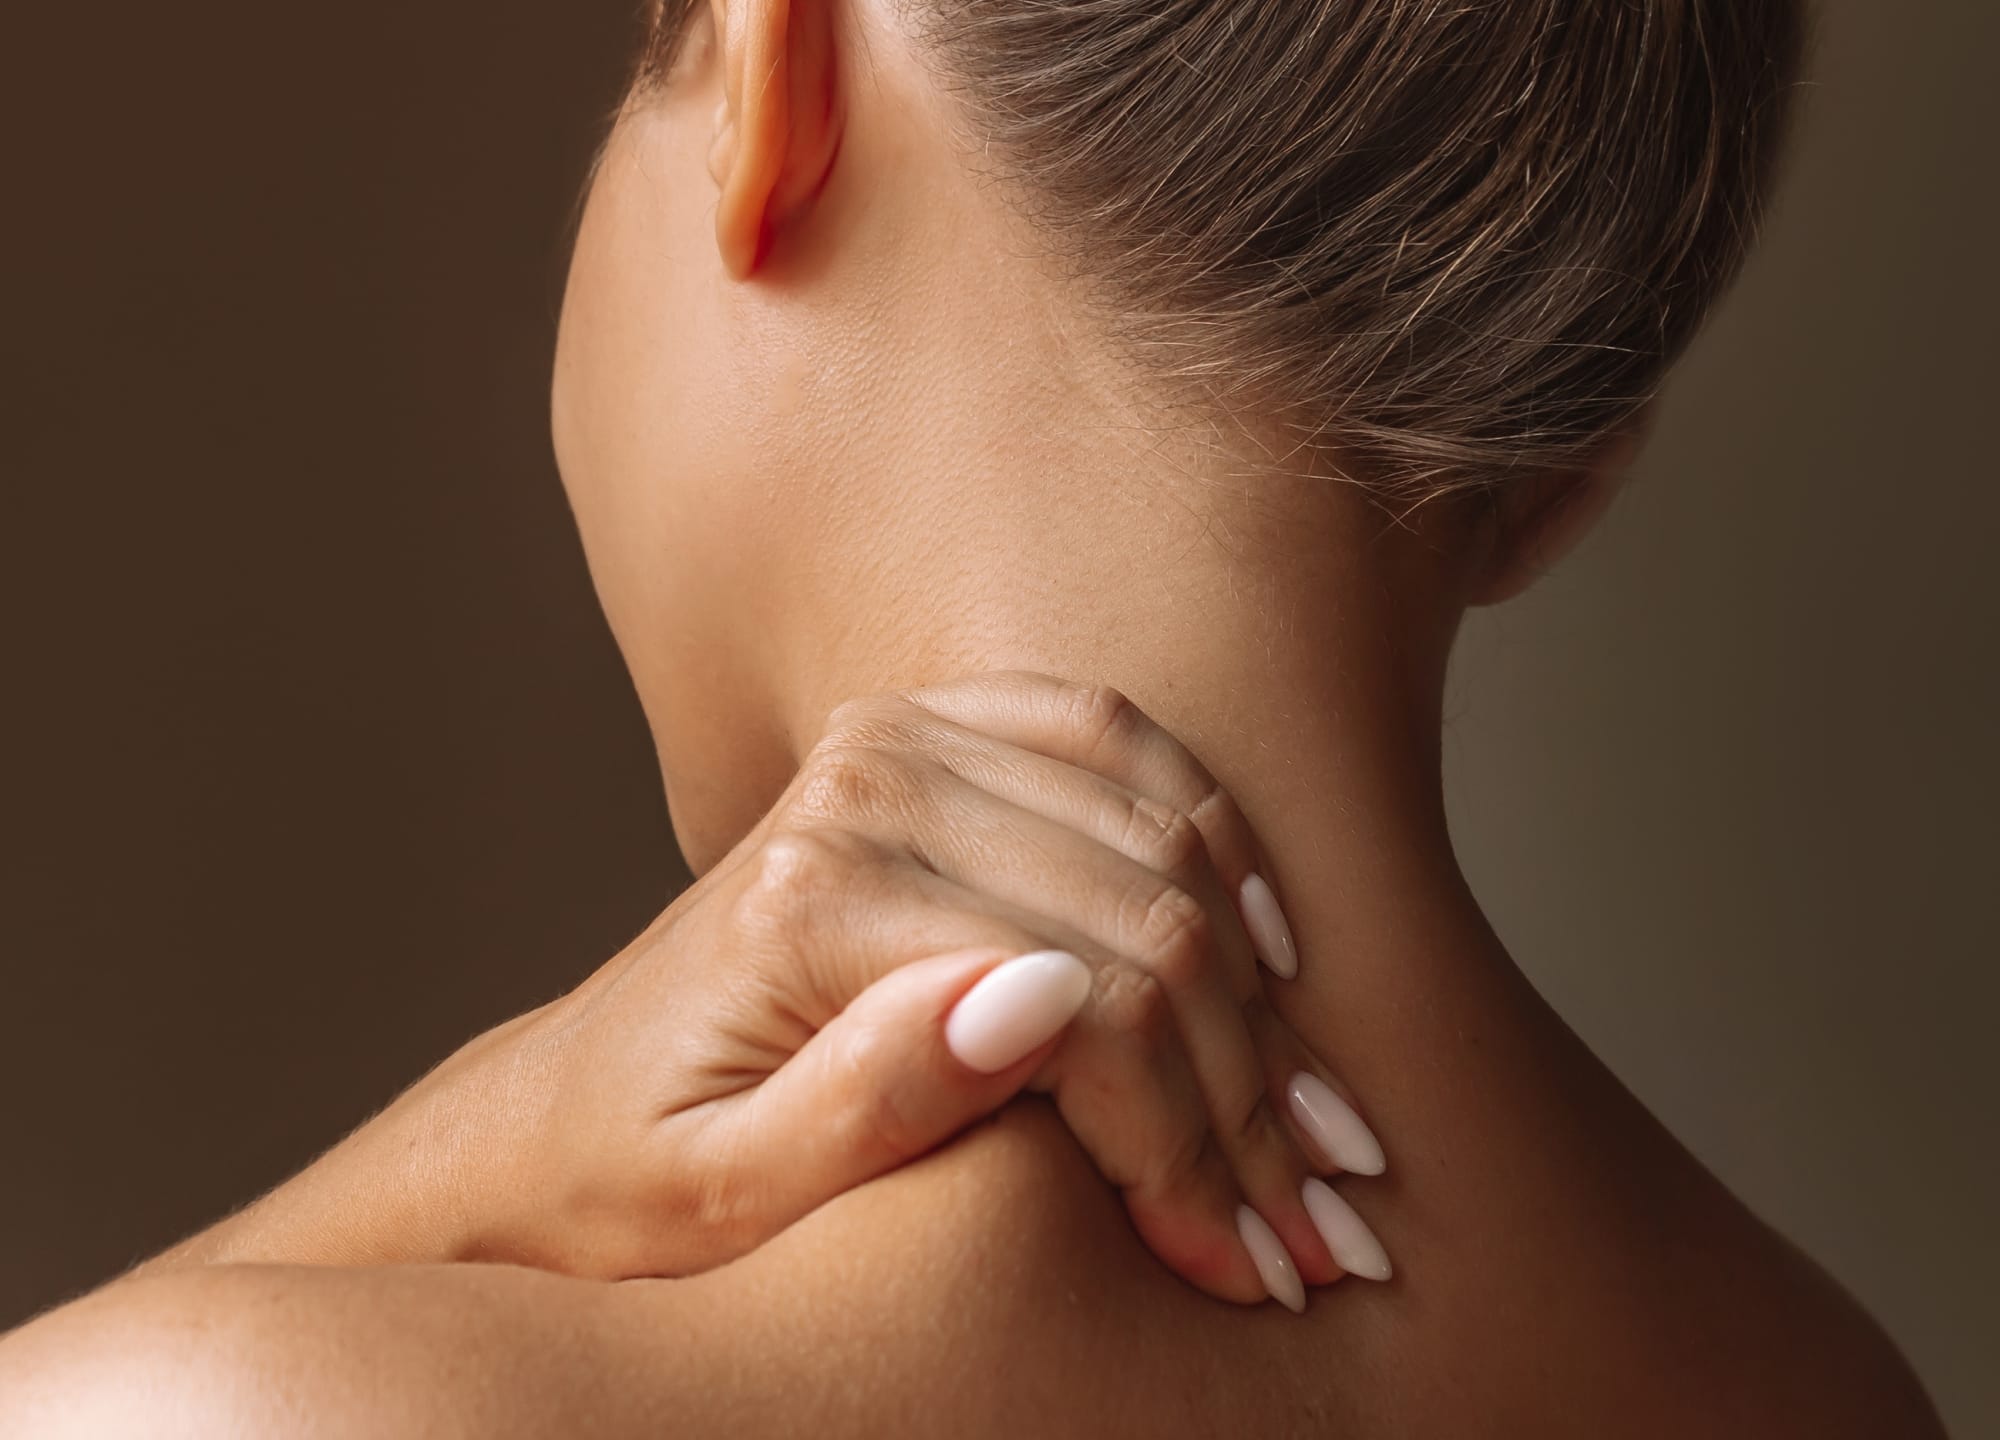 Trapezius Botox: How It Works, Before and Afters